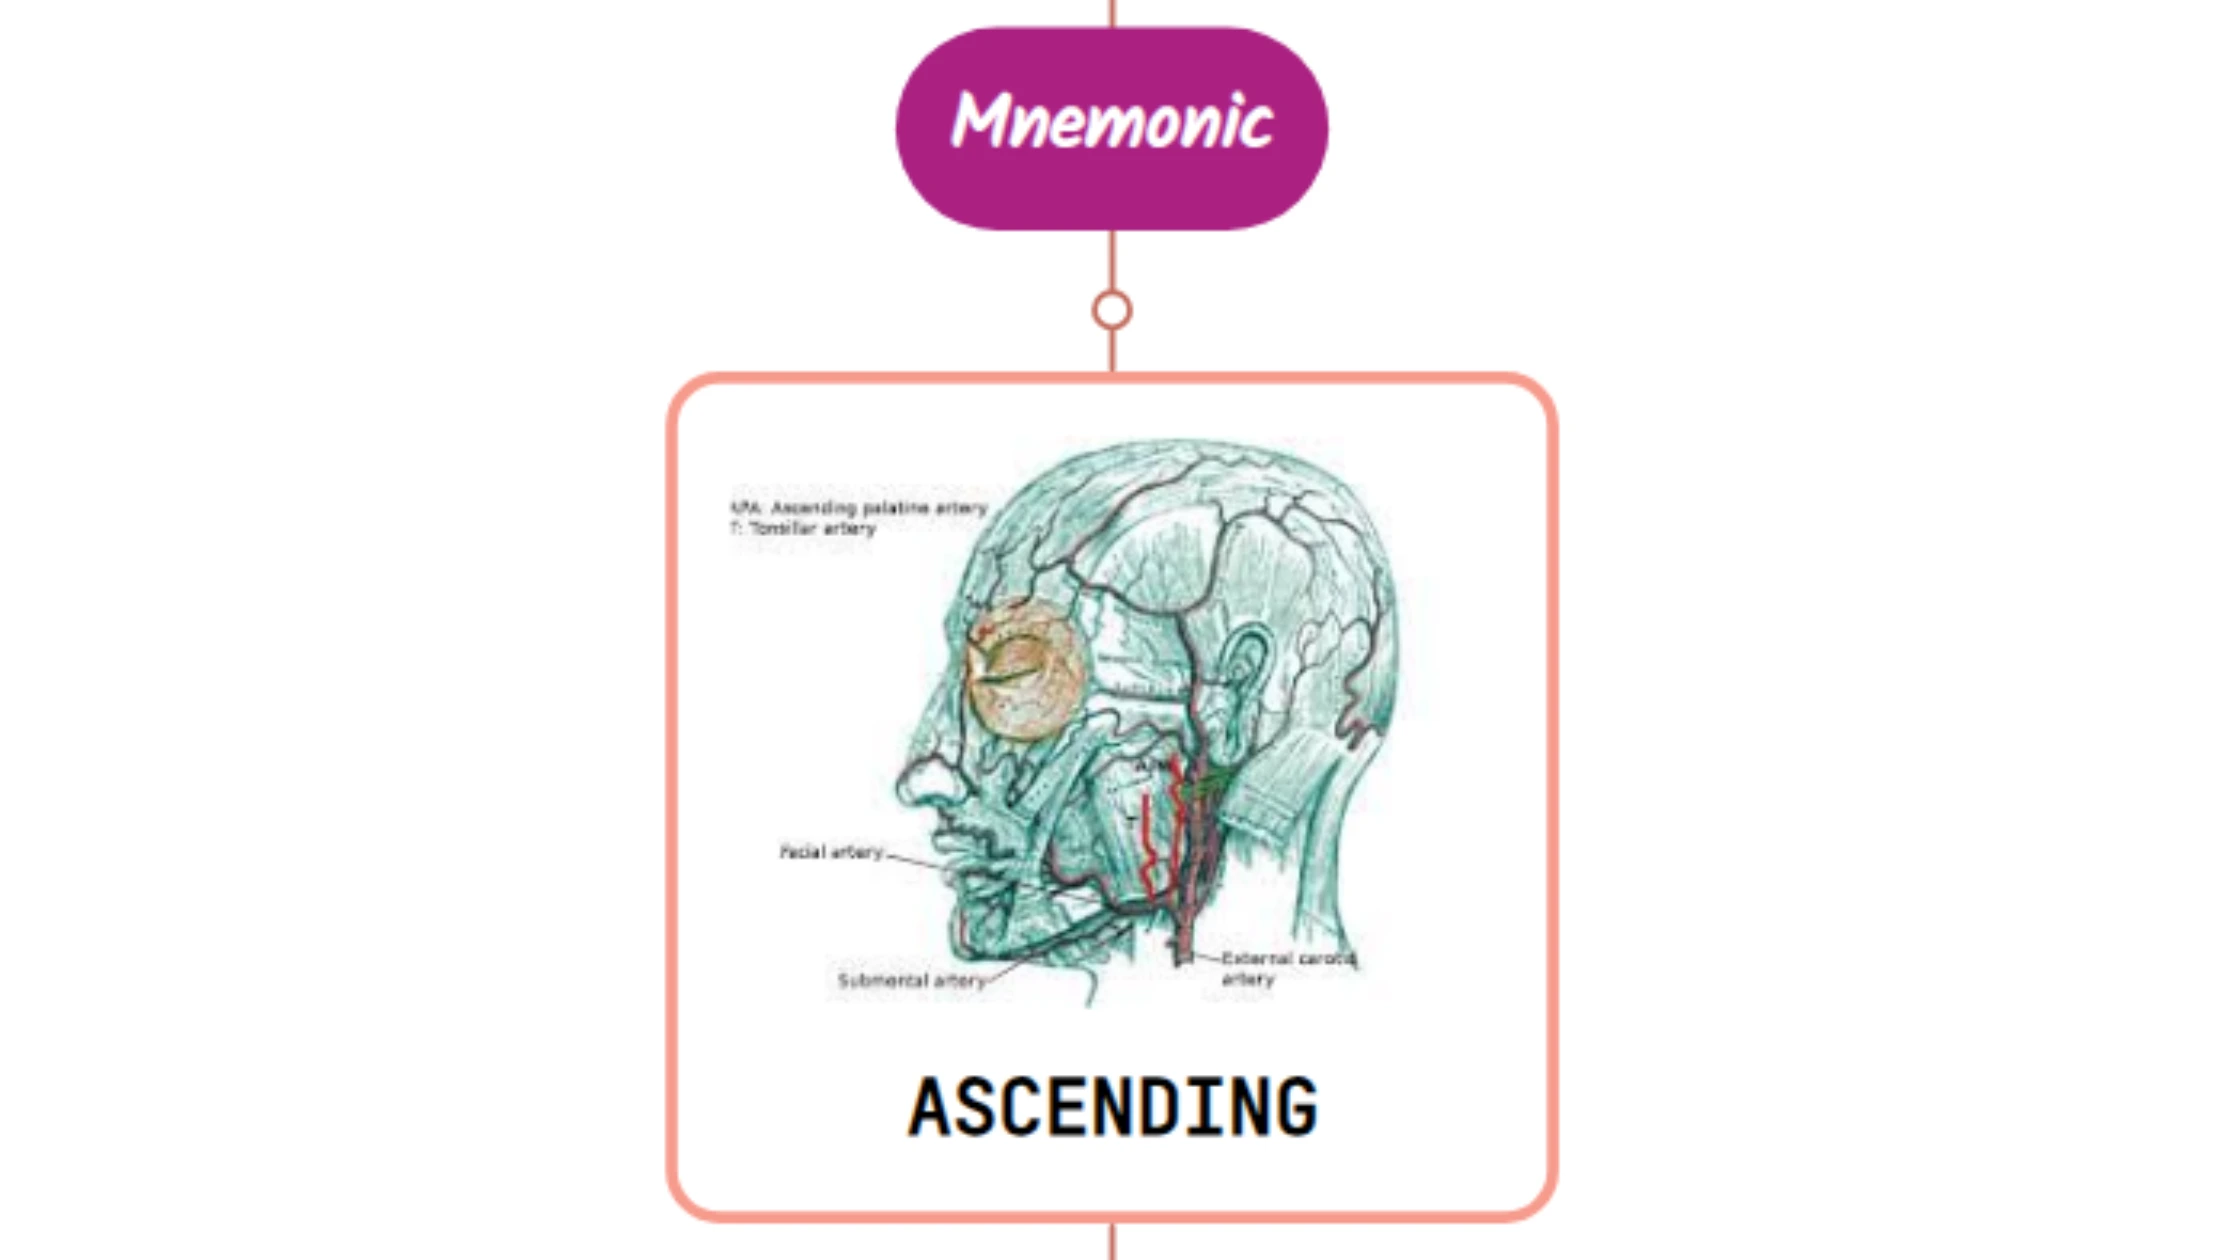 You are currently viewing Ascending Palatine Artery Mnemonic [ NEVER FORGET AGAIN ]